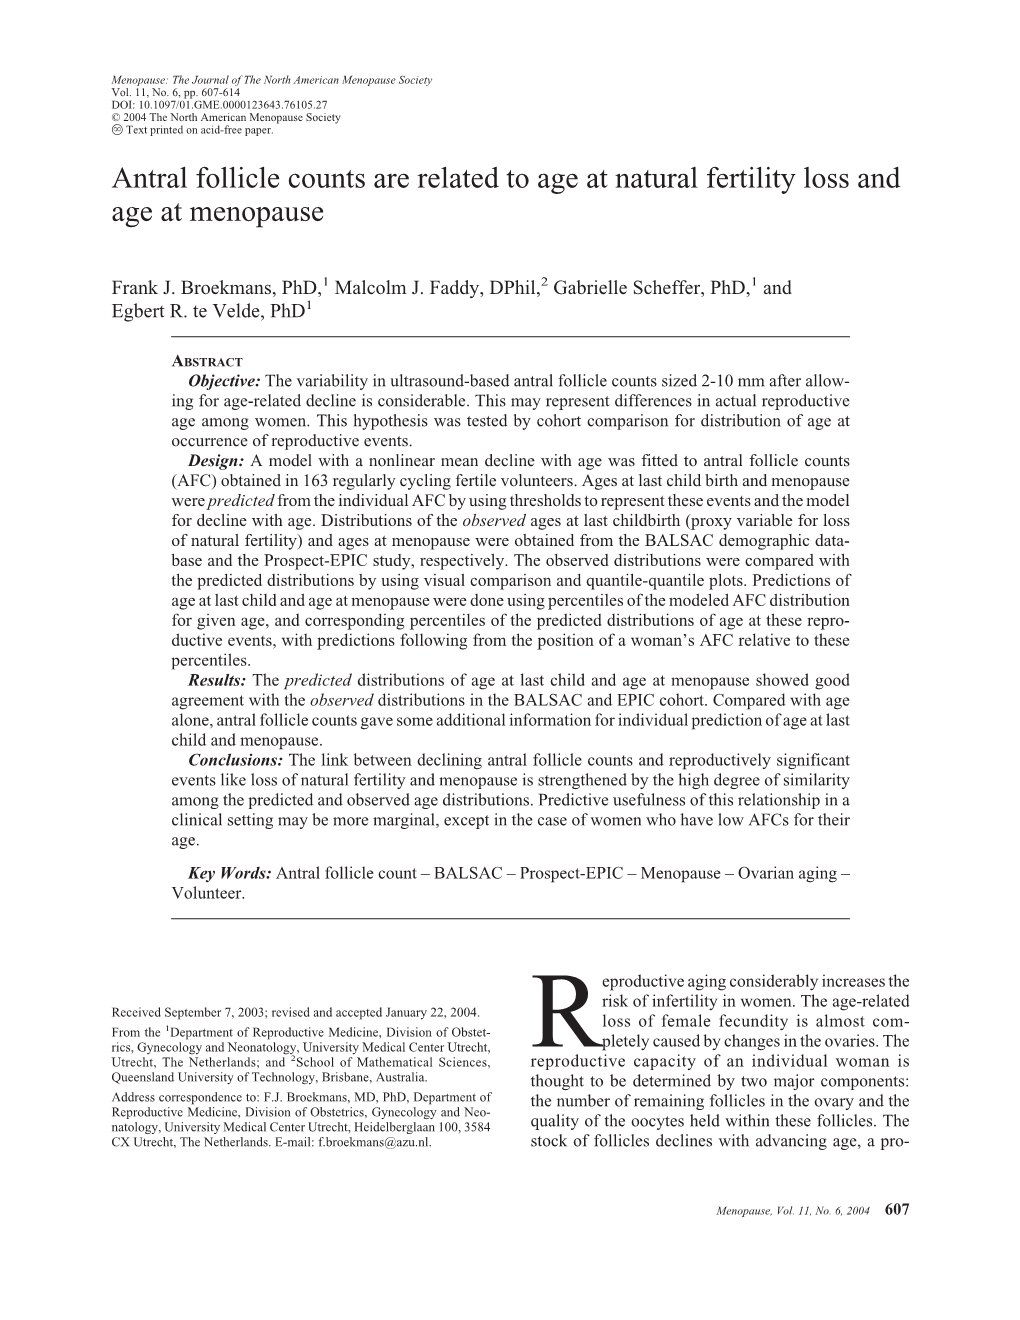 Antral Follicle Counts Are Related to Age at Natural Fertility Loss and Age at Menopause